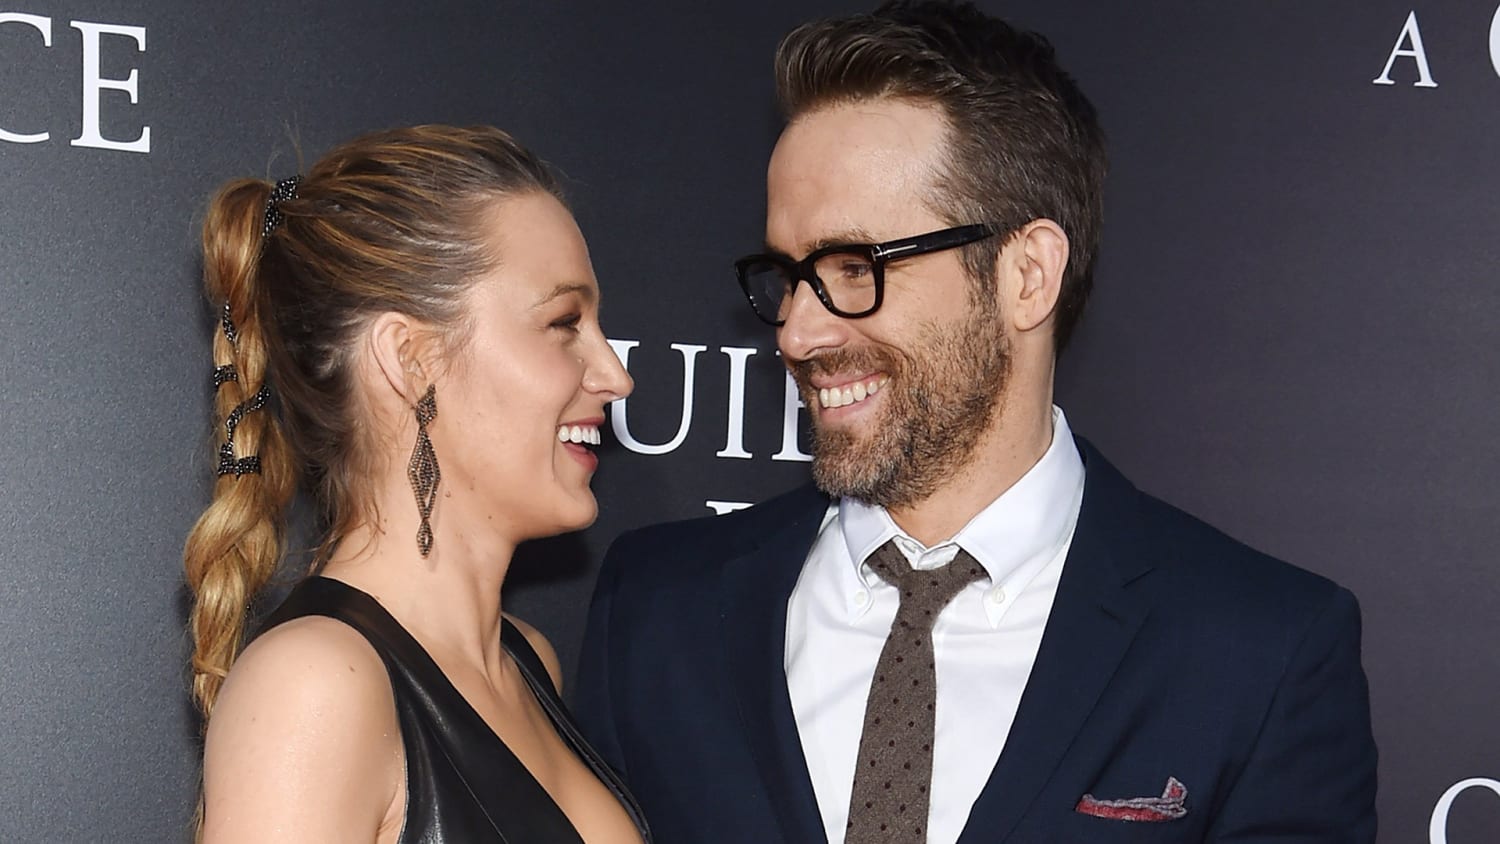 Blake Lively gets revenge on Ryan Reynolds with hilarious Instagram post - TODAY.com